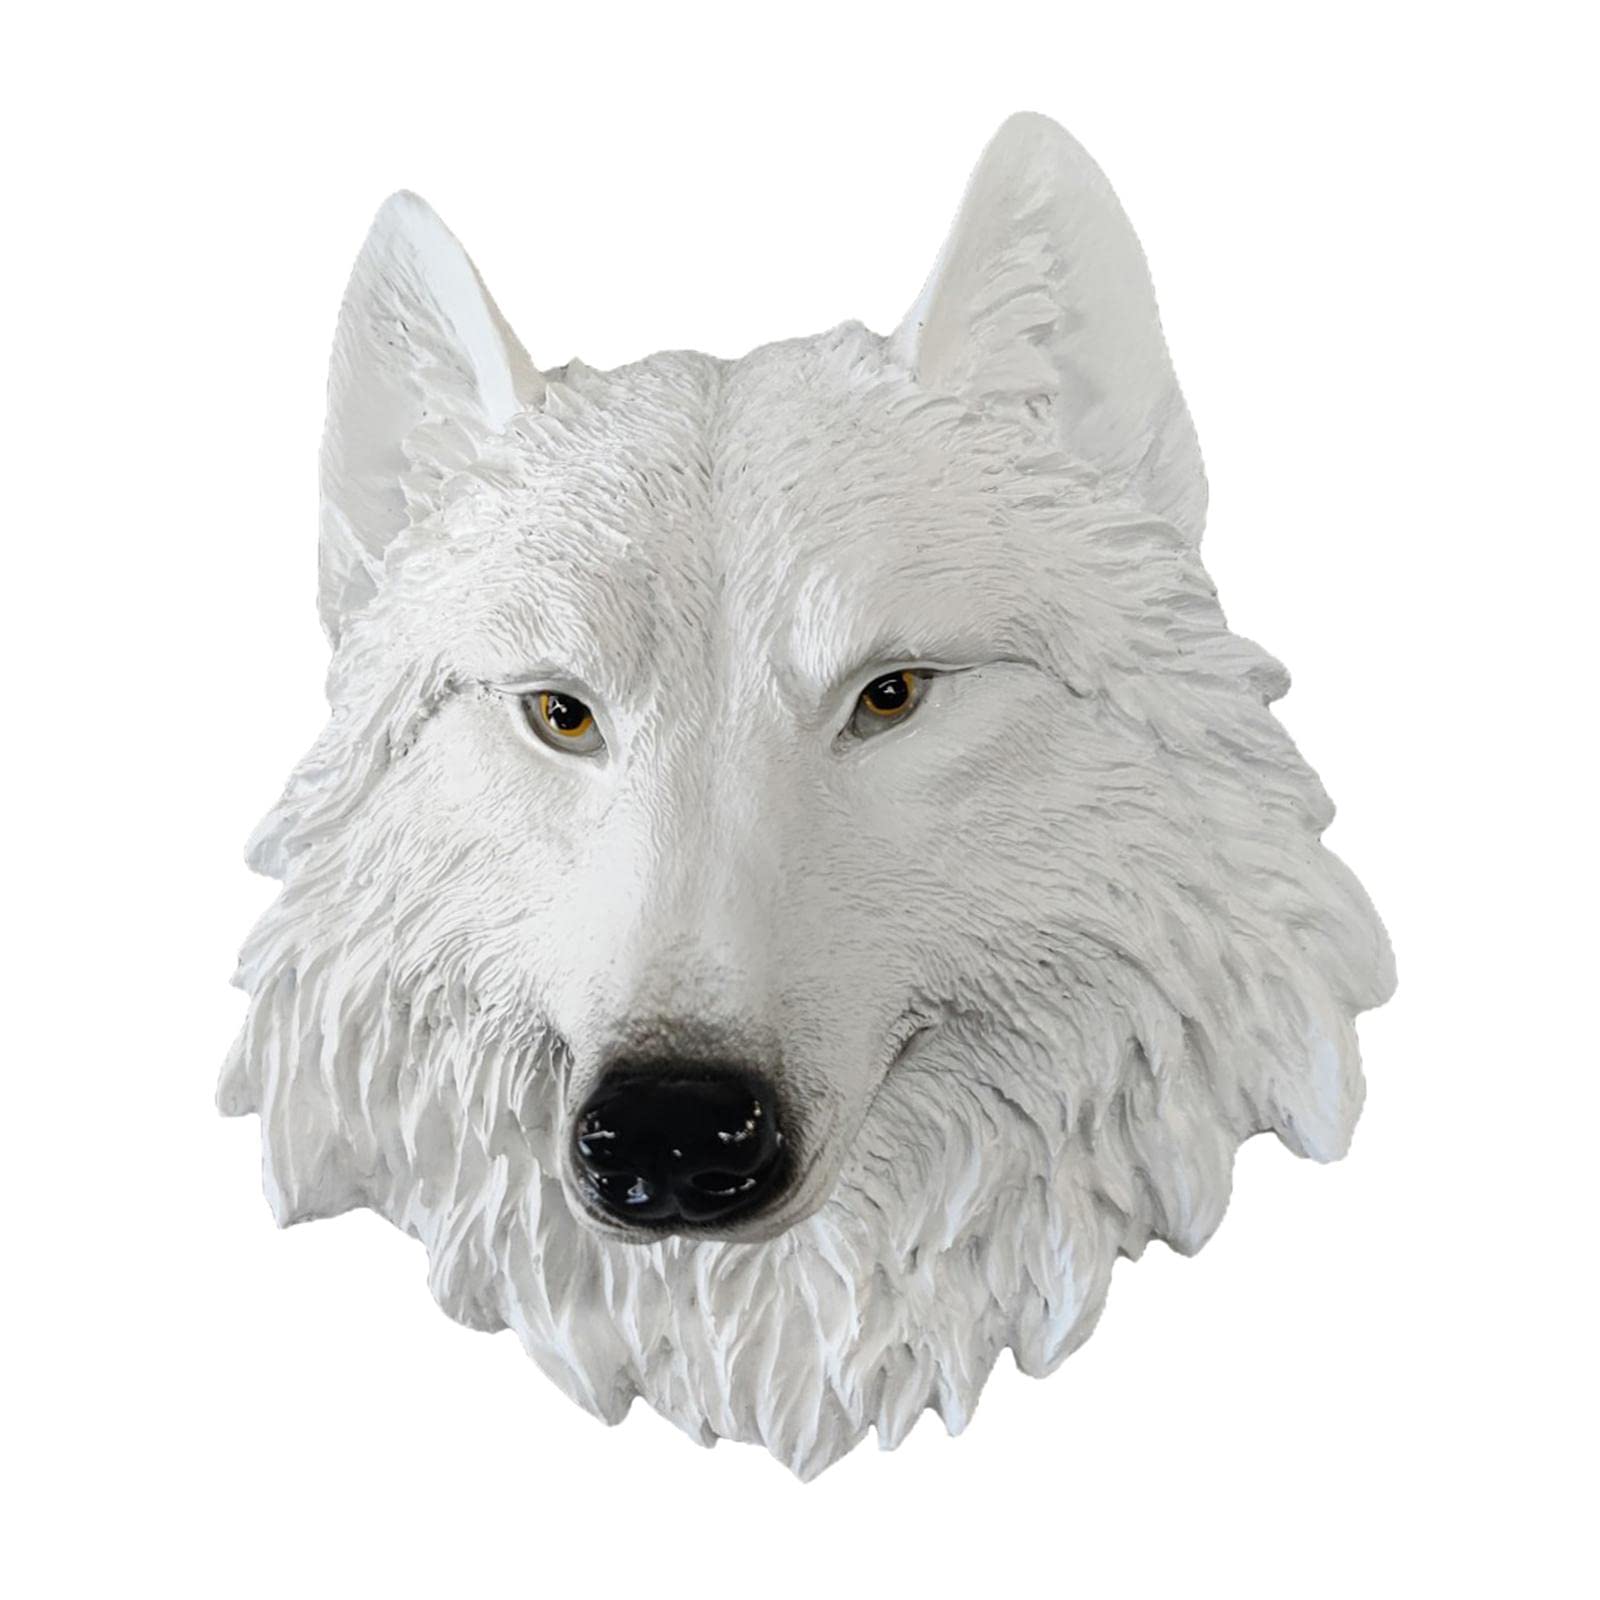 vente chaude perfk Head Statue, Wall Mounted Collectibles,Resin Hanging Wild Animals Head Sculpture For Bar Office Restaurant TV Cabinet Ornaments, Loup blanc Ki9ZGMuri meilleure vente